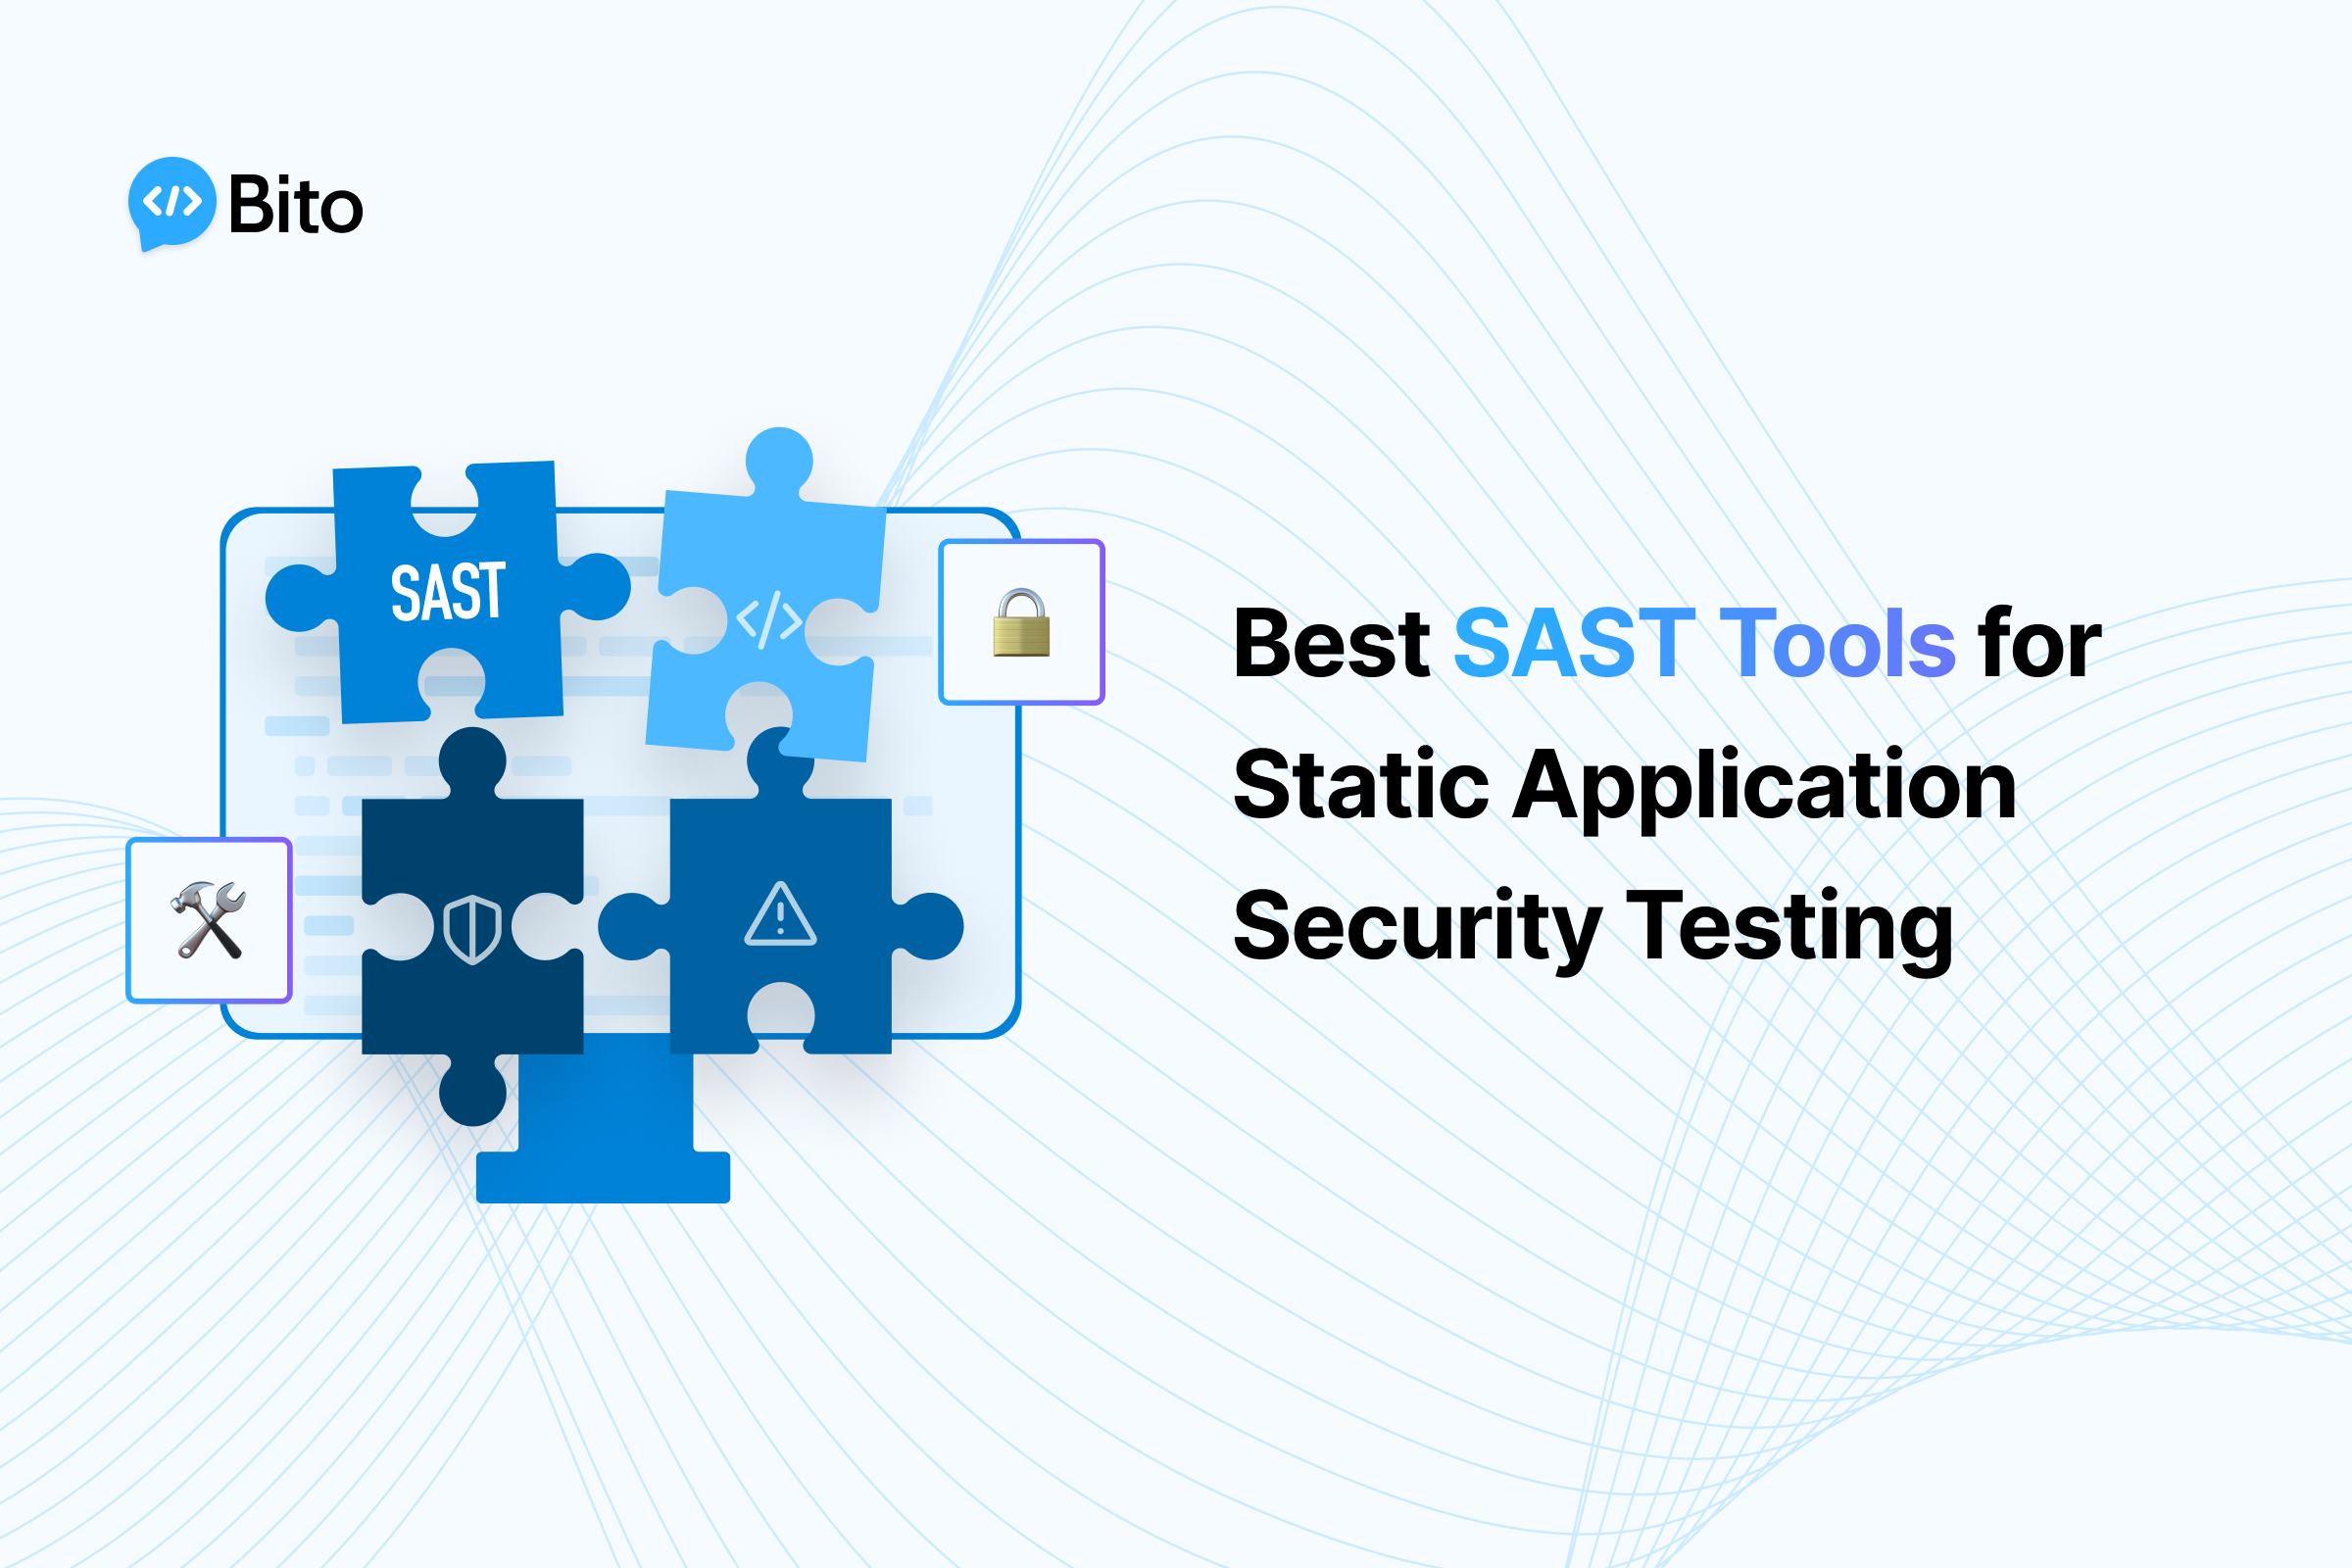 Best SAST Tools for Static Application Security Testing